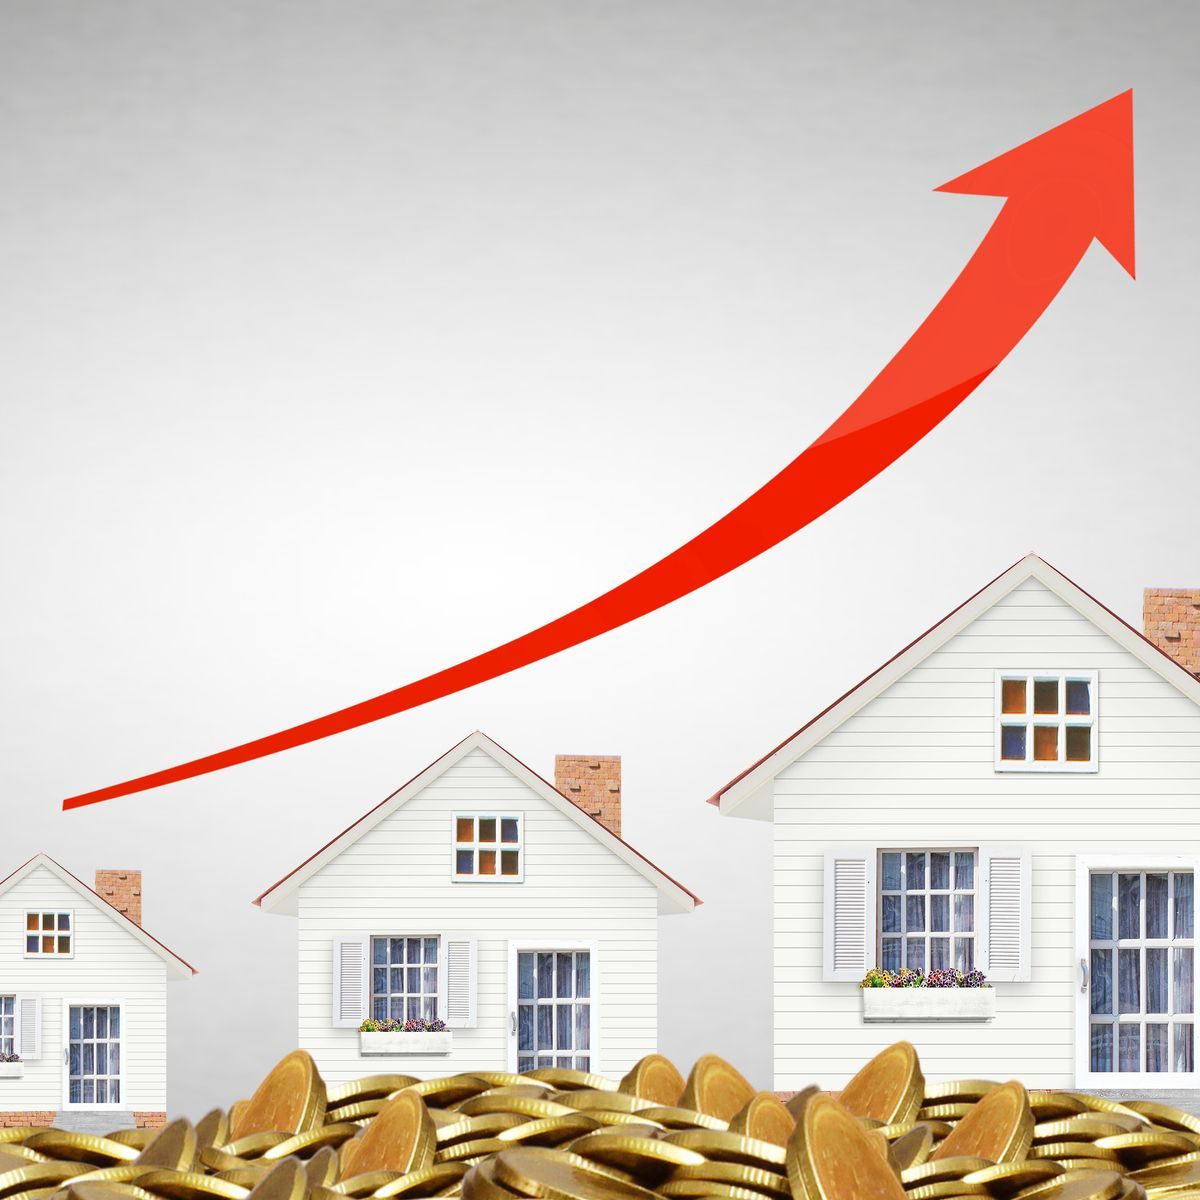 Red arrow pointing upwards and to the right, symbolizing growing real estate value with larger homes